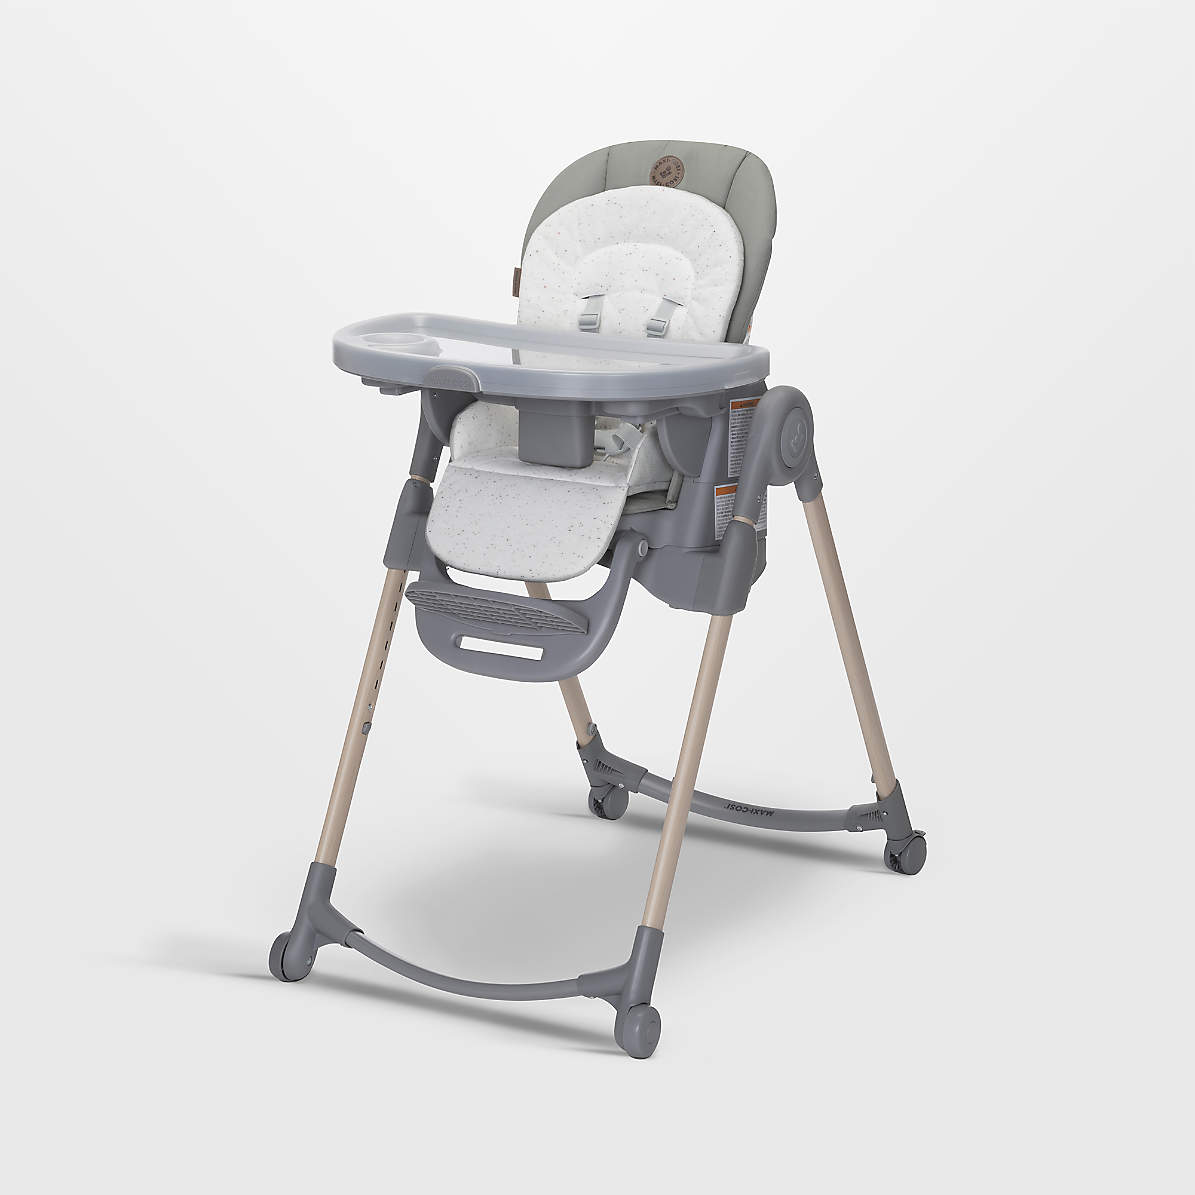  Maxi-Cosi 6-in-1 Minla High Chair, 6 Modes for Years of  Growth, Essential Grey : Baby